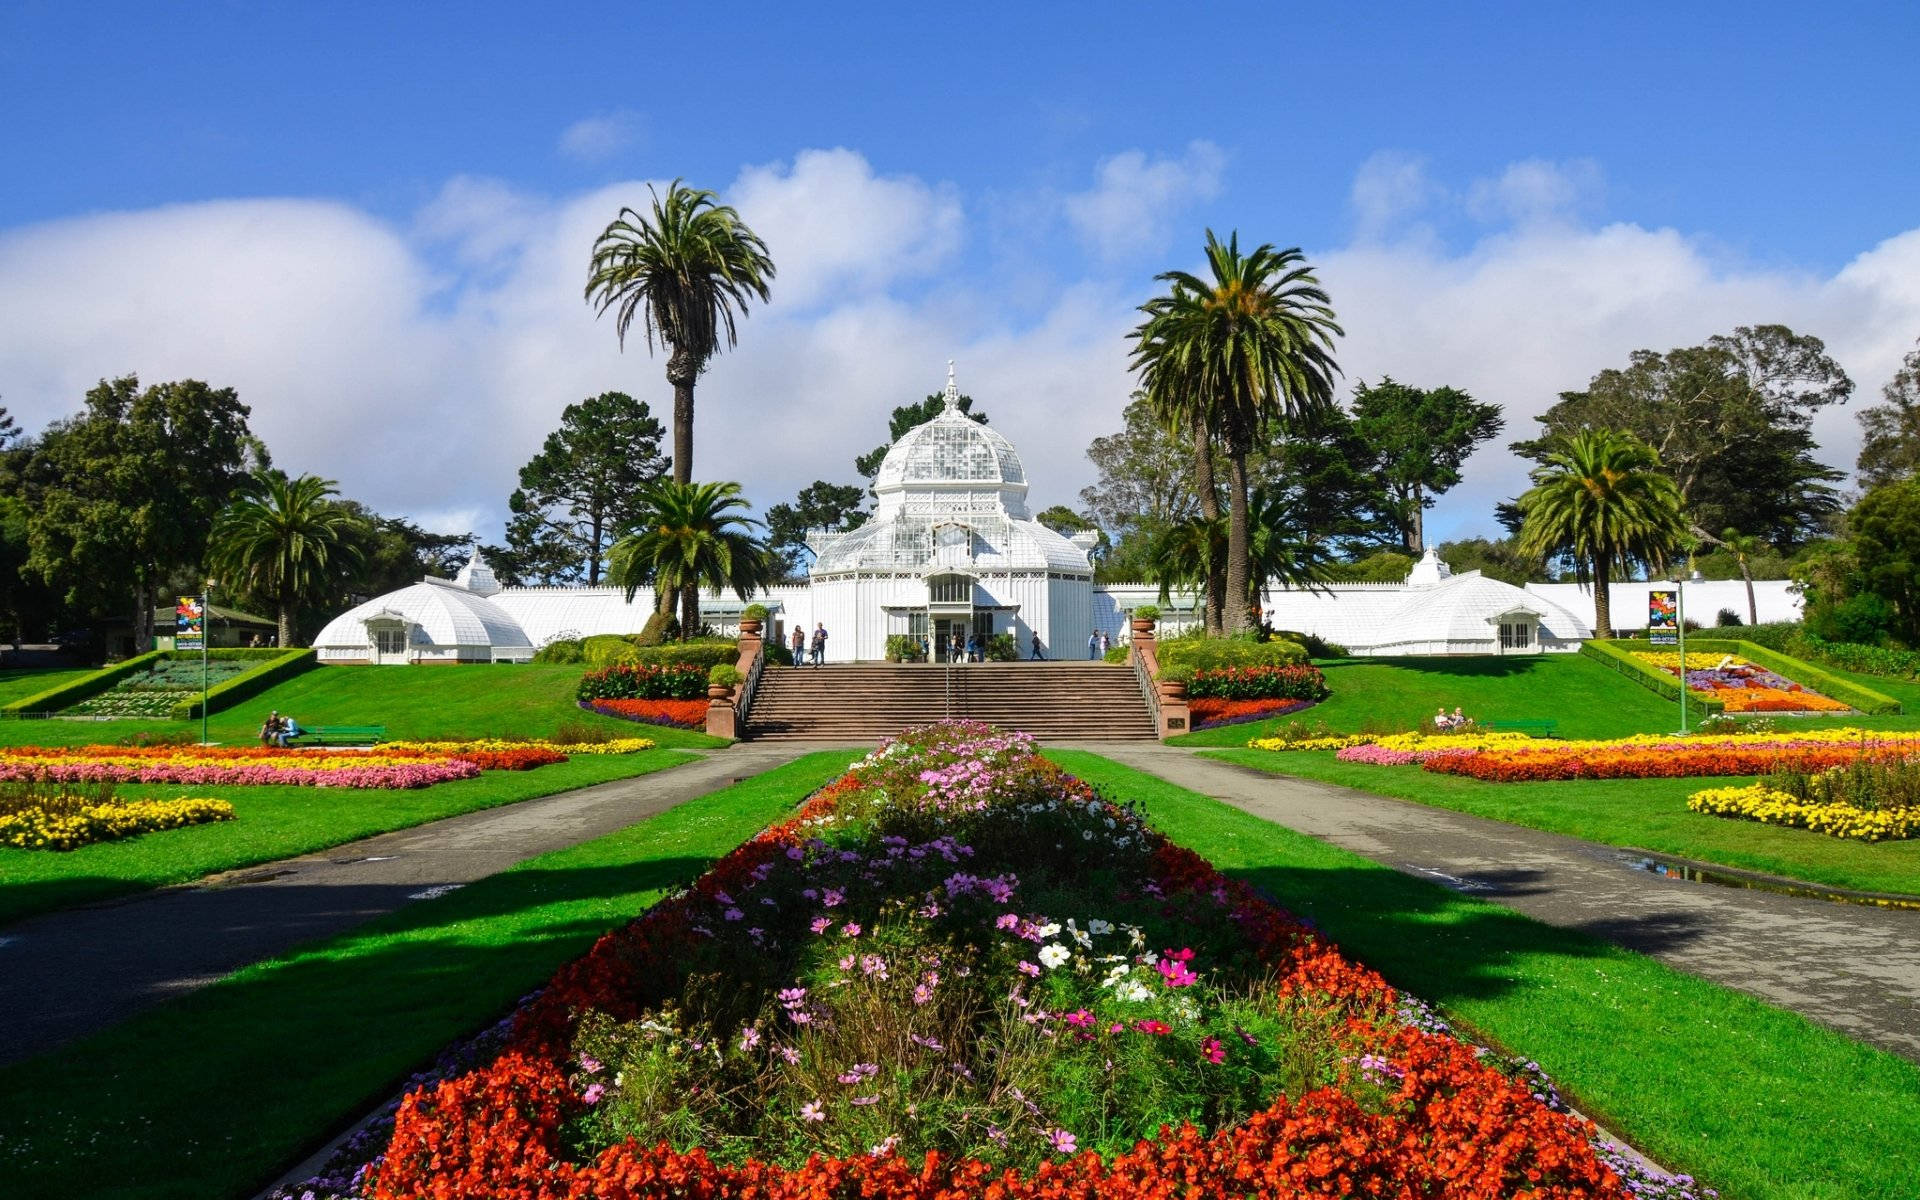 San Francisco Conservatory Of Flowers